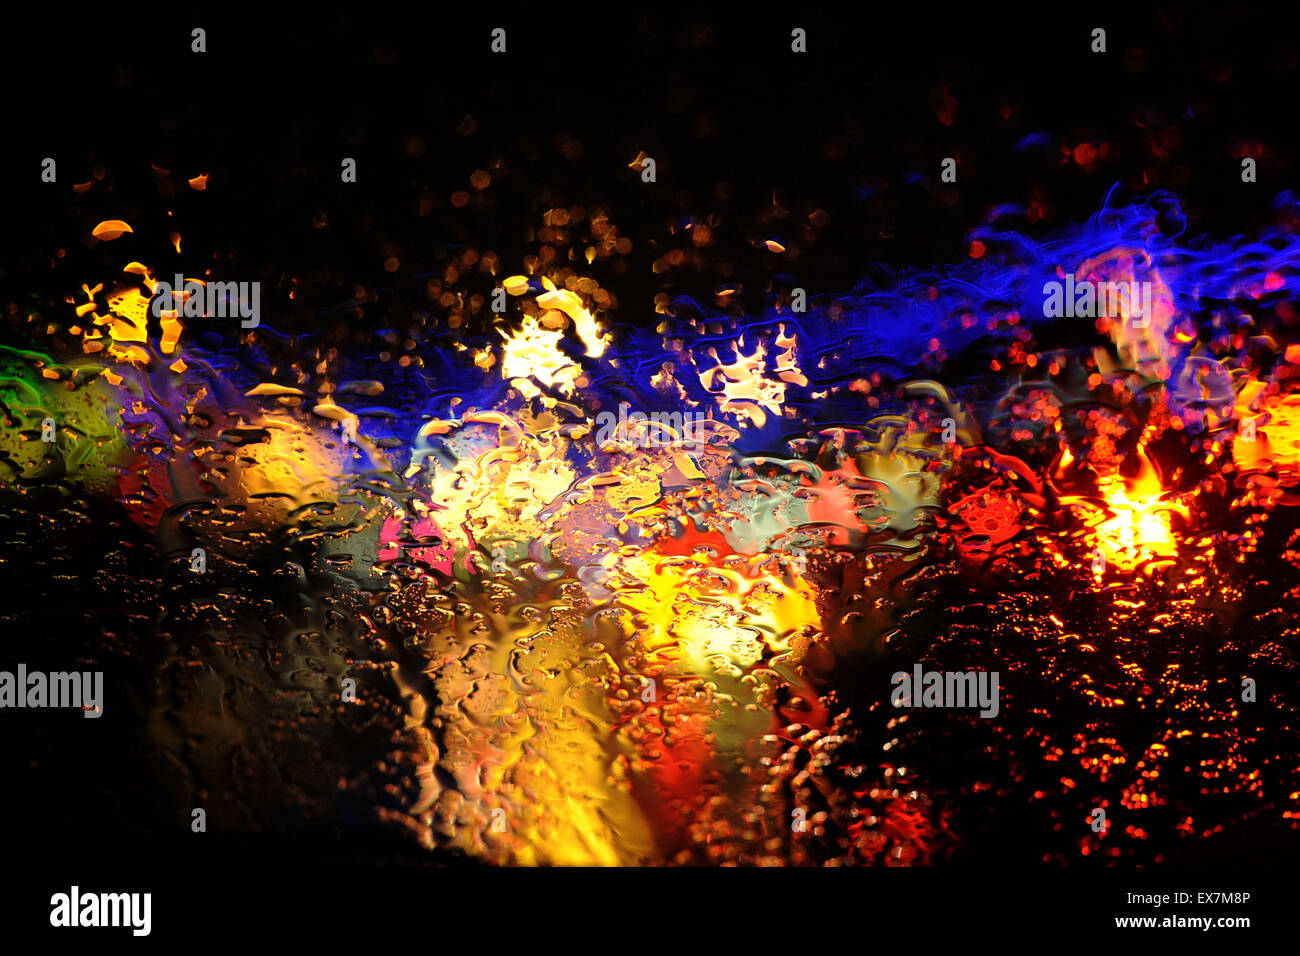 A windscreen showing traffic and brake lights during rainy weather on a motorway. Stock Photo